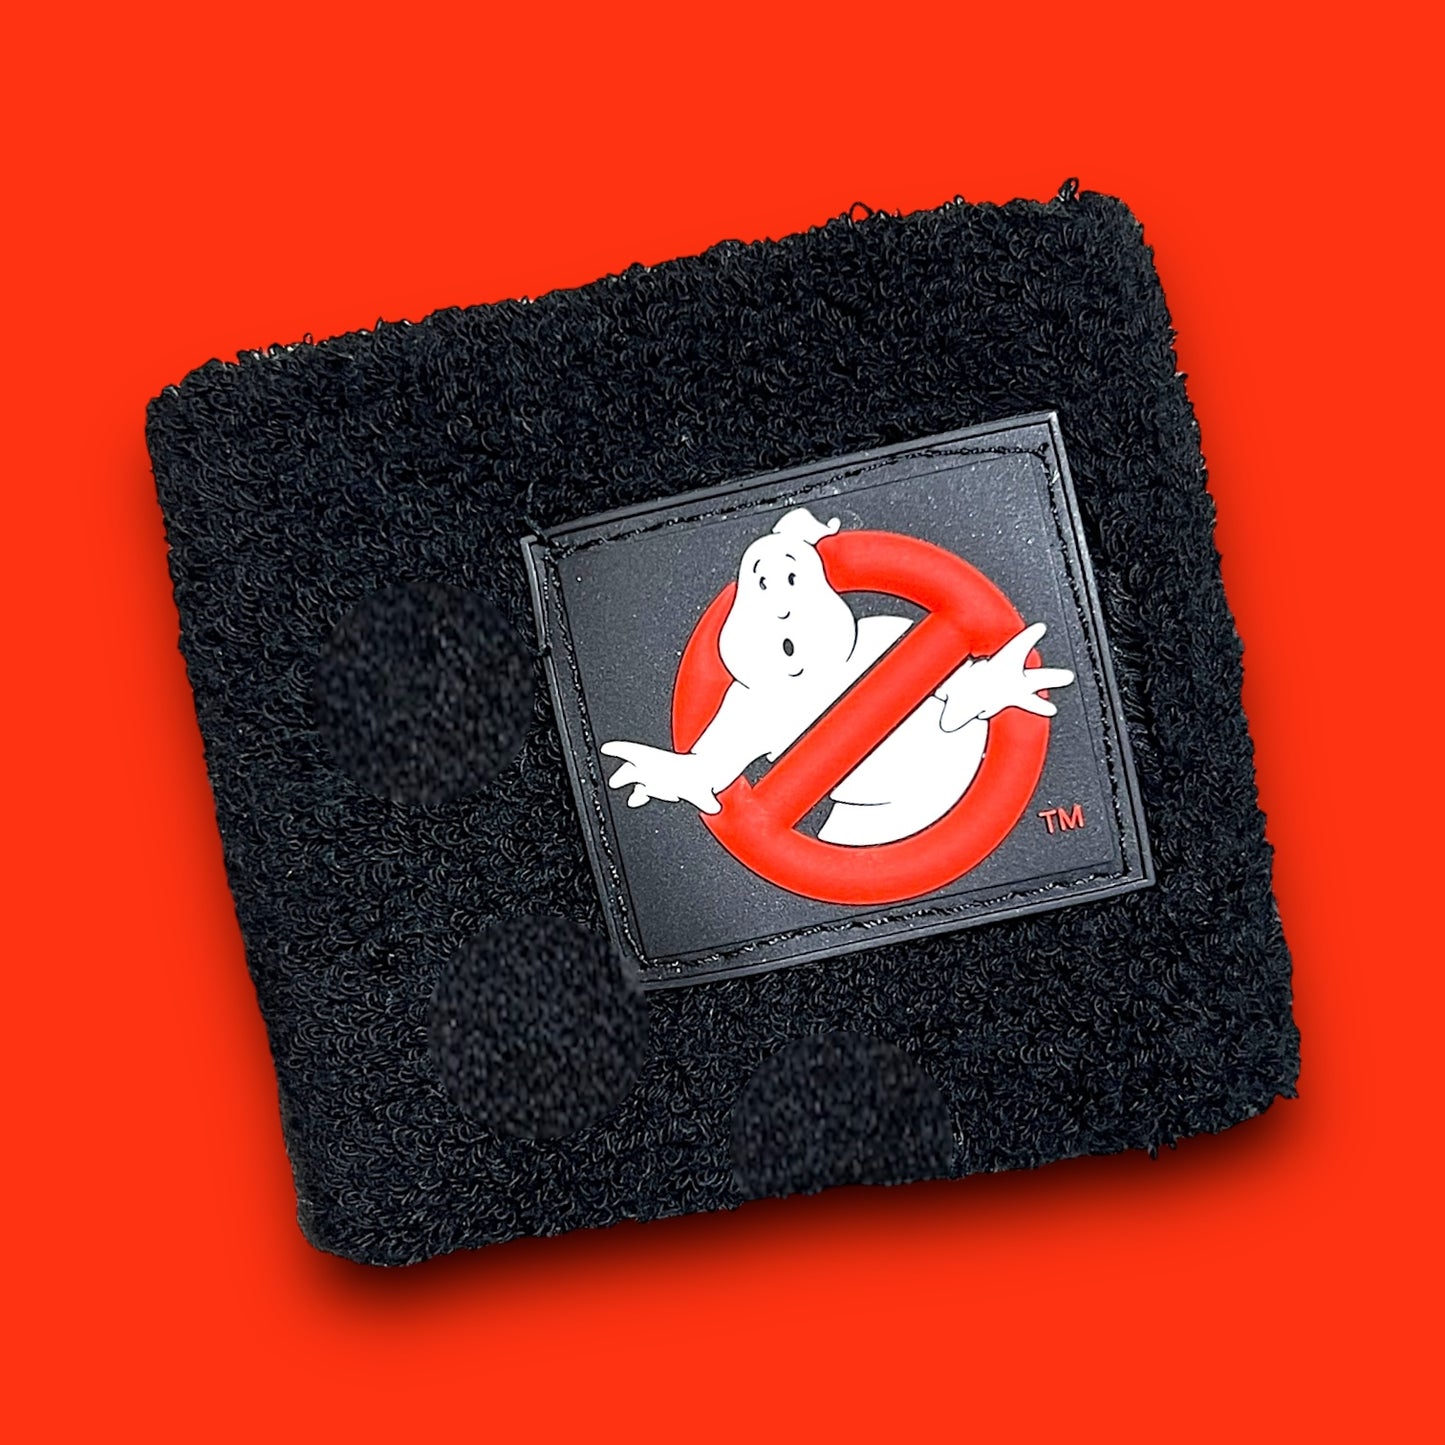 Ghostbusters Wrist Band